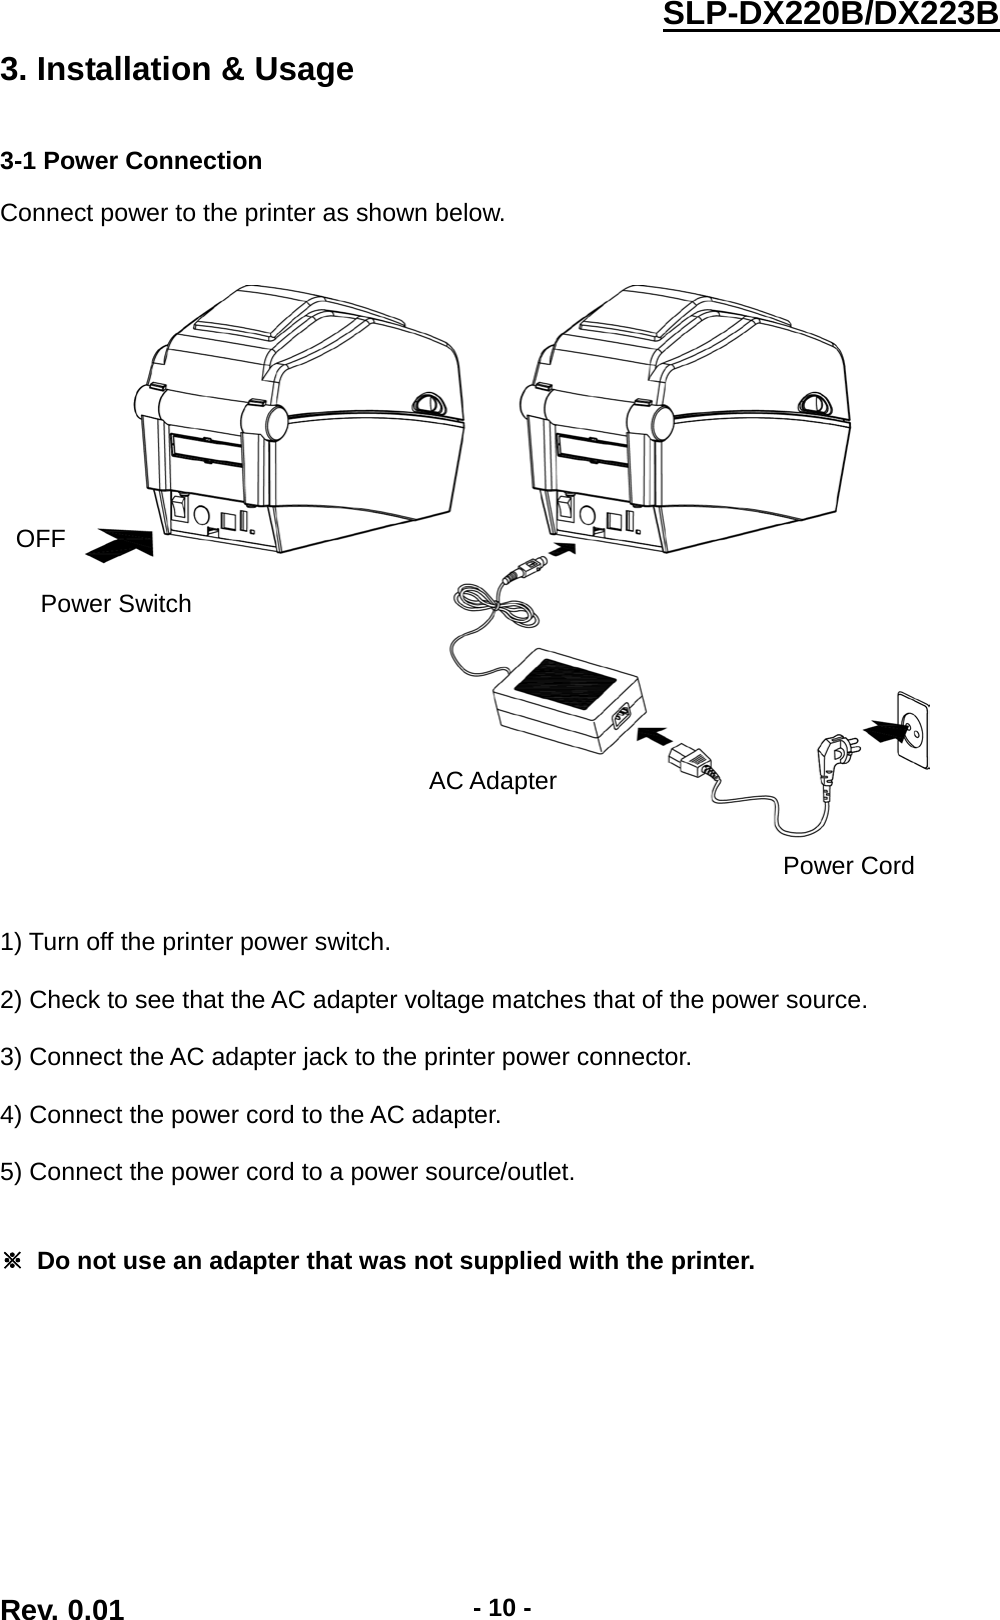  SLP-DX220B/DX223B  3. Installation &amp; Usage   3-1 Power Connection  Connect power to the printer as shown below.         1) Turn off the printer power switch.  2) Check to see that the AC adapter voltage matches that of the power source.  3) Connect the AC adapter jack to the printer power connector.  4) Connect the power cord to the AC adapter.  5) Connect the power cord to a power source/outlet.   ※ Do not use an adapter that was not supplied with the printer. OFF Power Switch Power Cord AC Adapter Rev. 0.01  - 10 - 